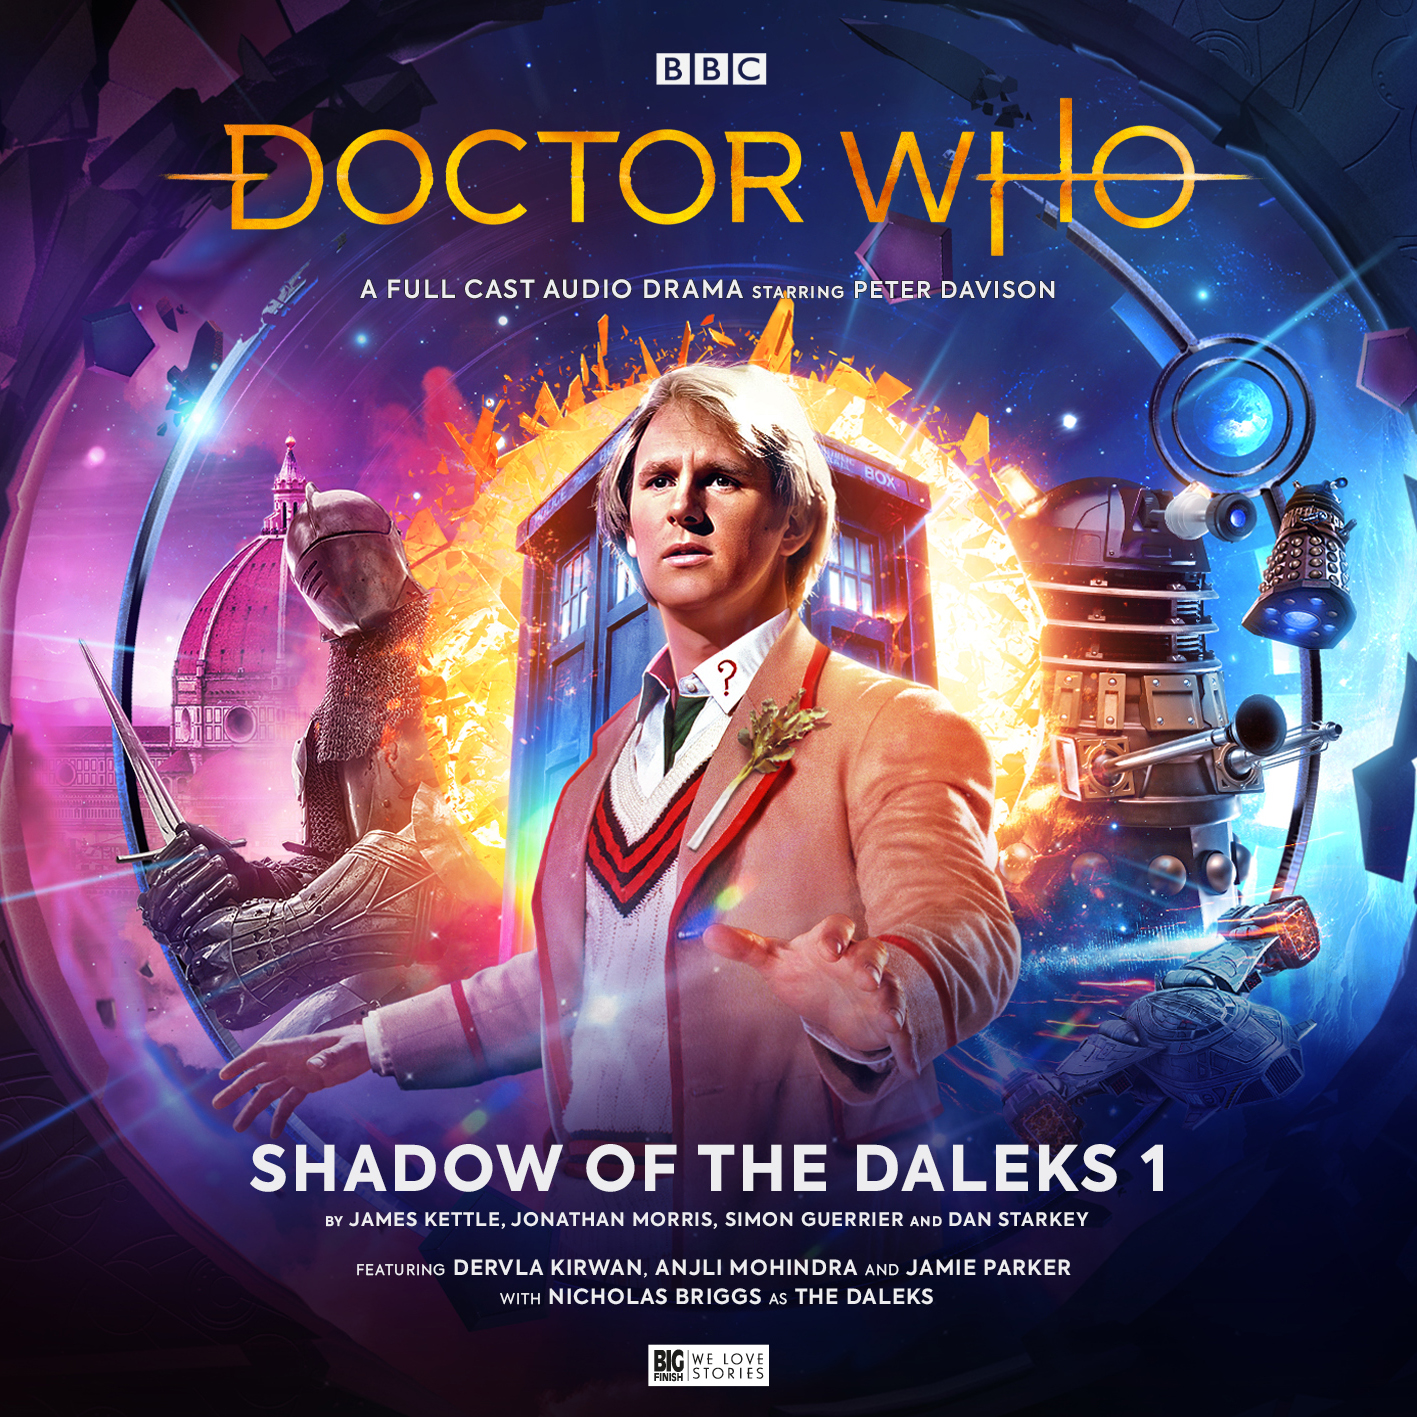 Caught up in the Time War. (AUDIO: Shadow of the Daleks 1 [+]Loading...["Shadow of the Daleks 1"])